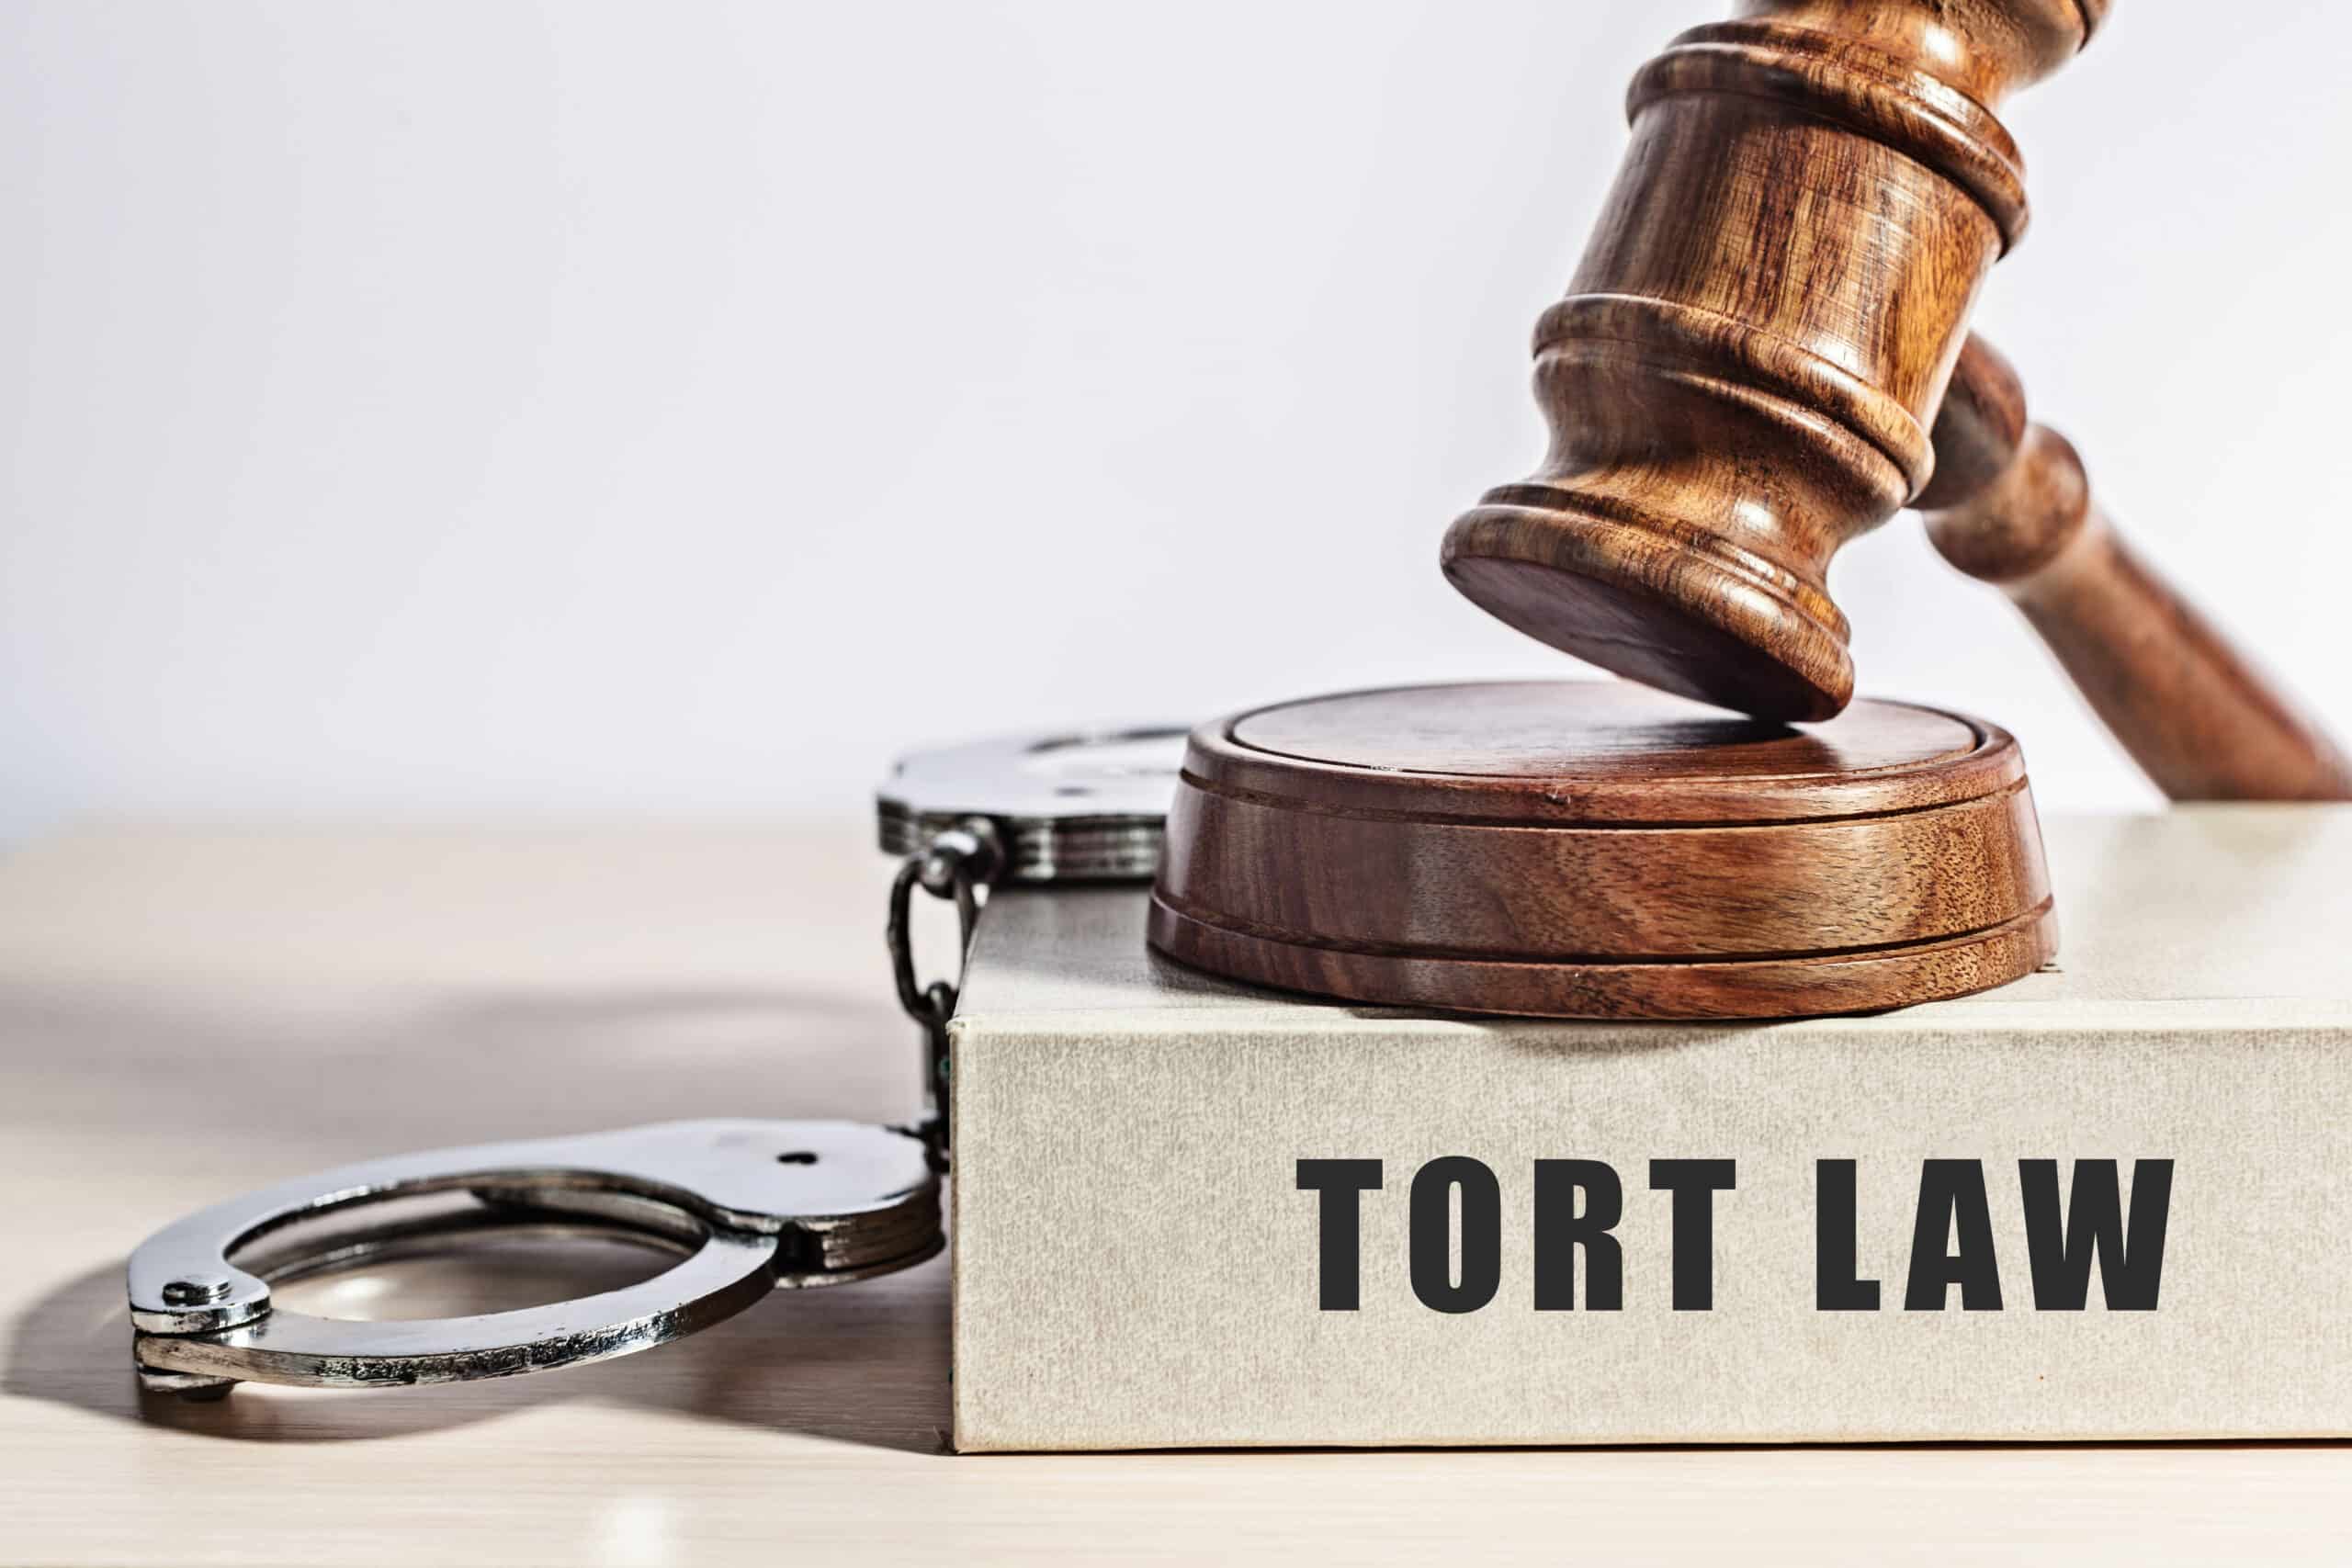 The Florida Legislature's Latest Attempts at Tort Reform and How They Affect Personal Injury Cases